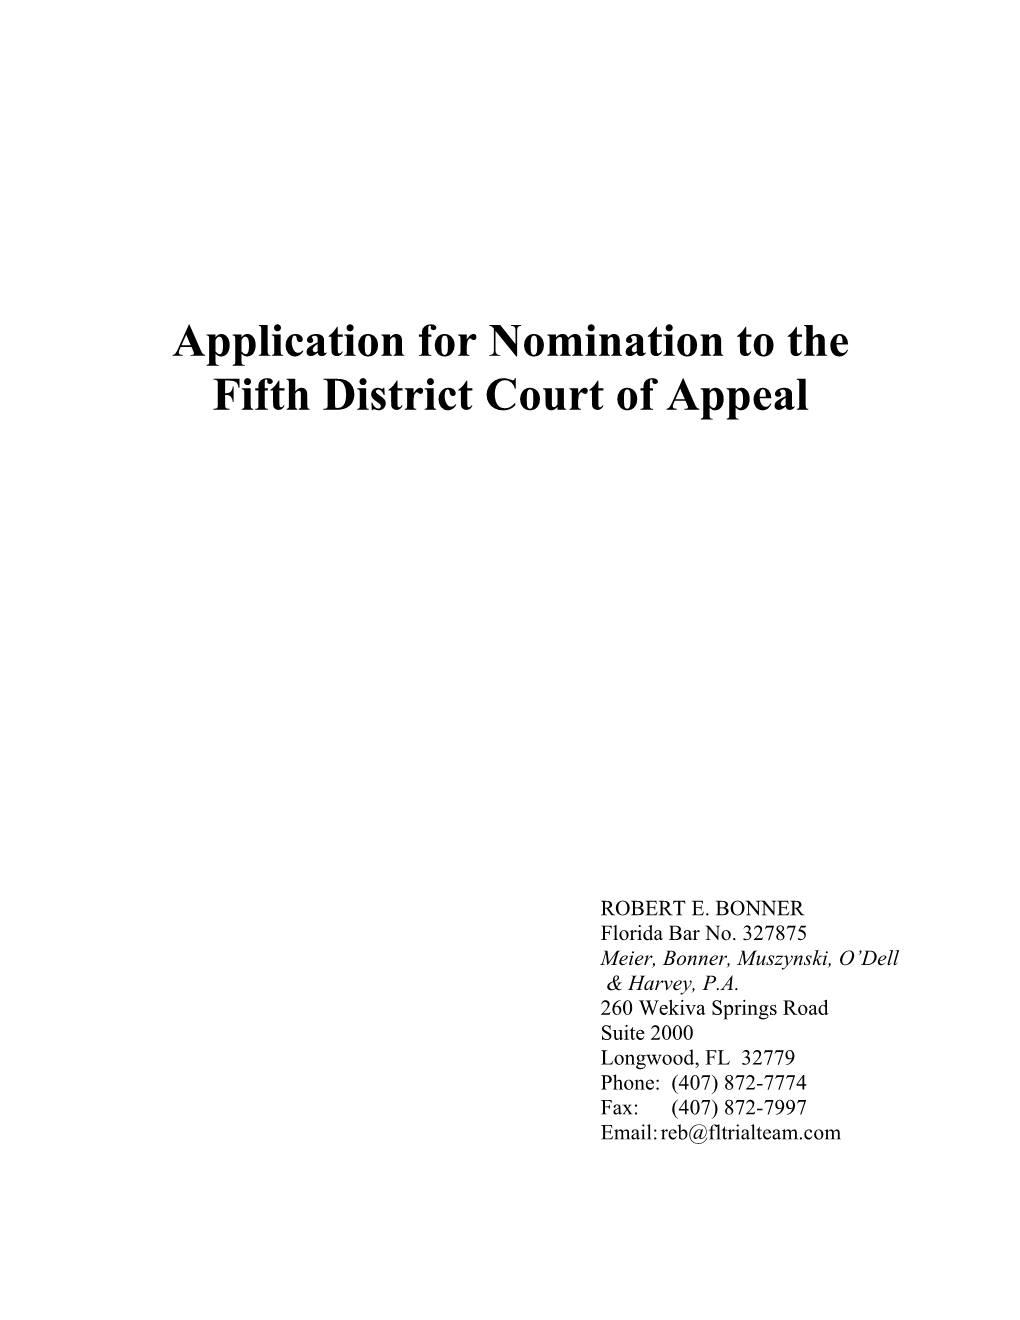 Application for Nomination to the Fifth District Court of Appeal